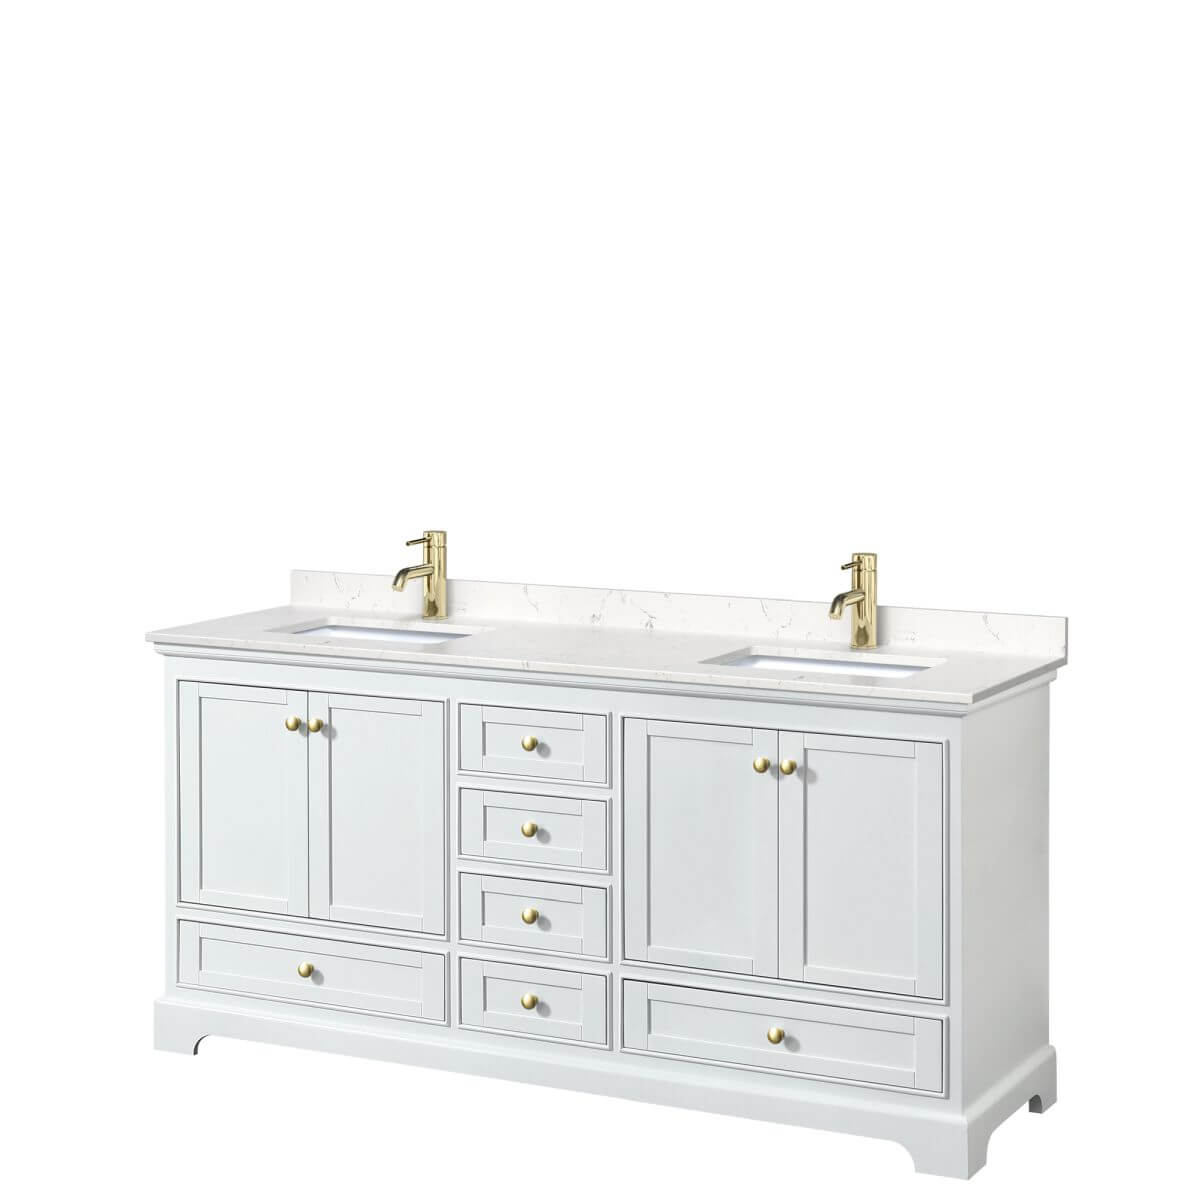 Wyndham Collection Deborah 72 inch Double Bathroom Vanity in White with Carrara Cultured Marble Countertop, Undermount Square Sinks, Brushed Gold Trim and No Mirrors - WCS202072DWGC2UNSMXX